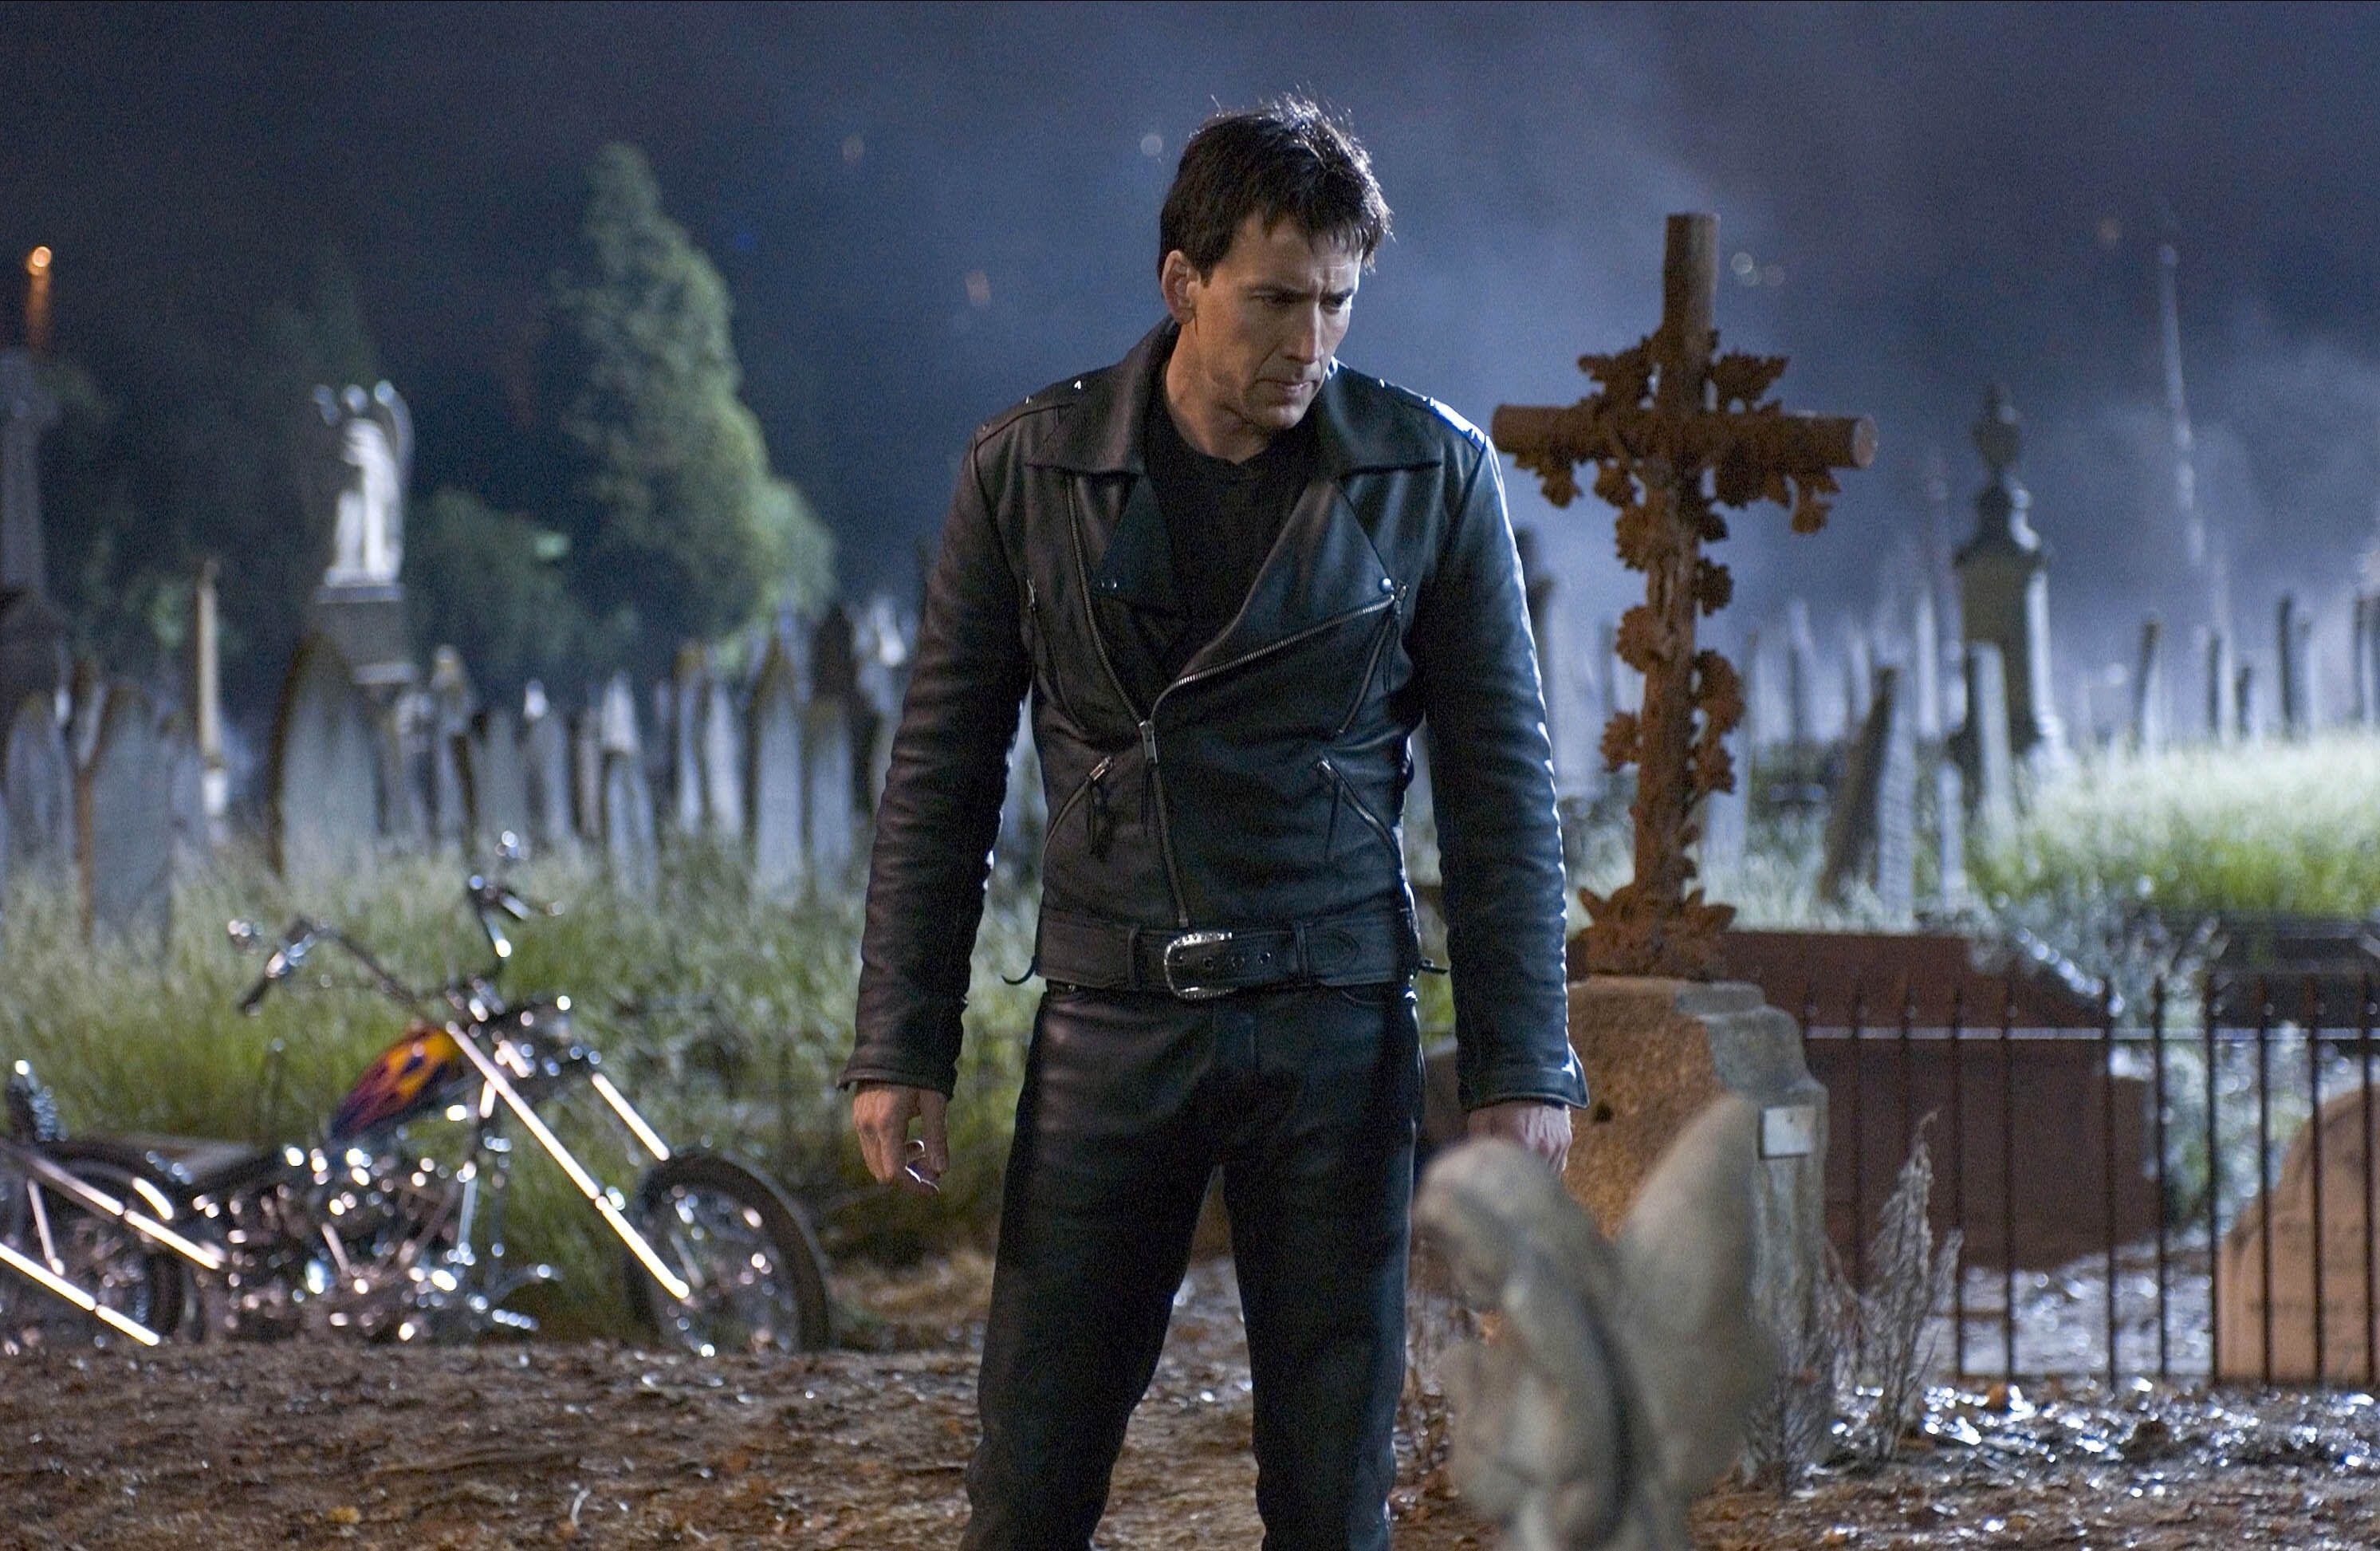 A stoic man in leathers stands nearby a motorcycle at a graveyard